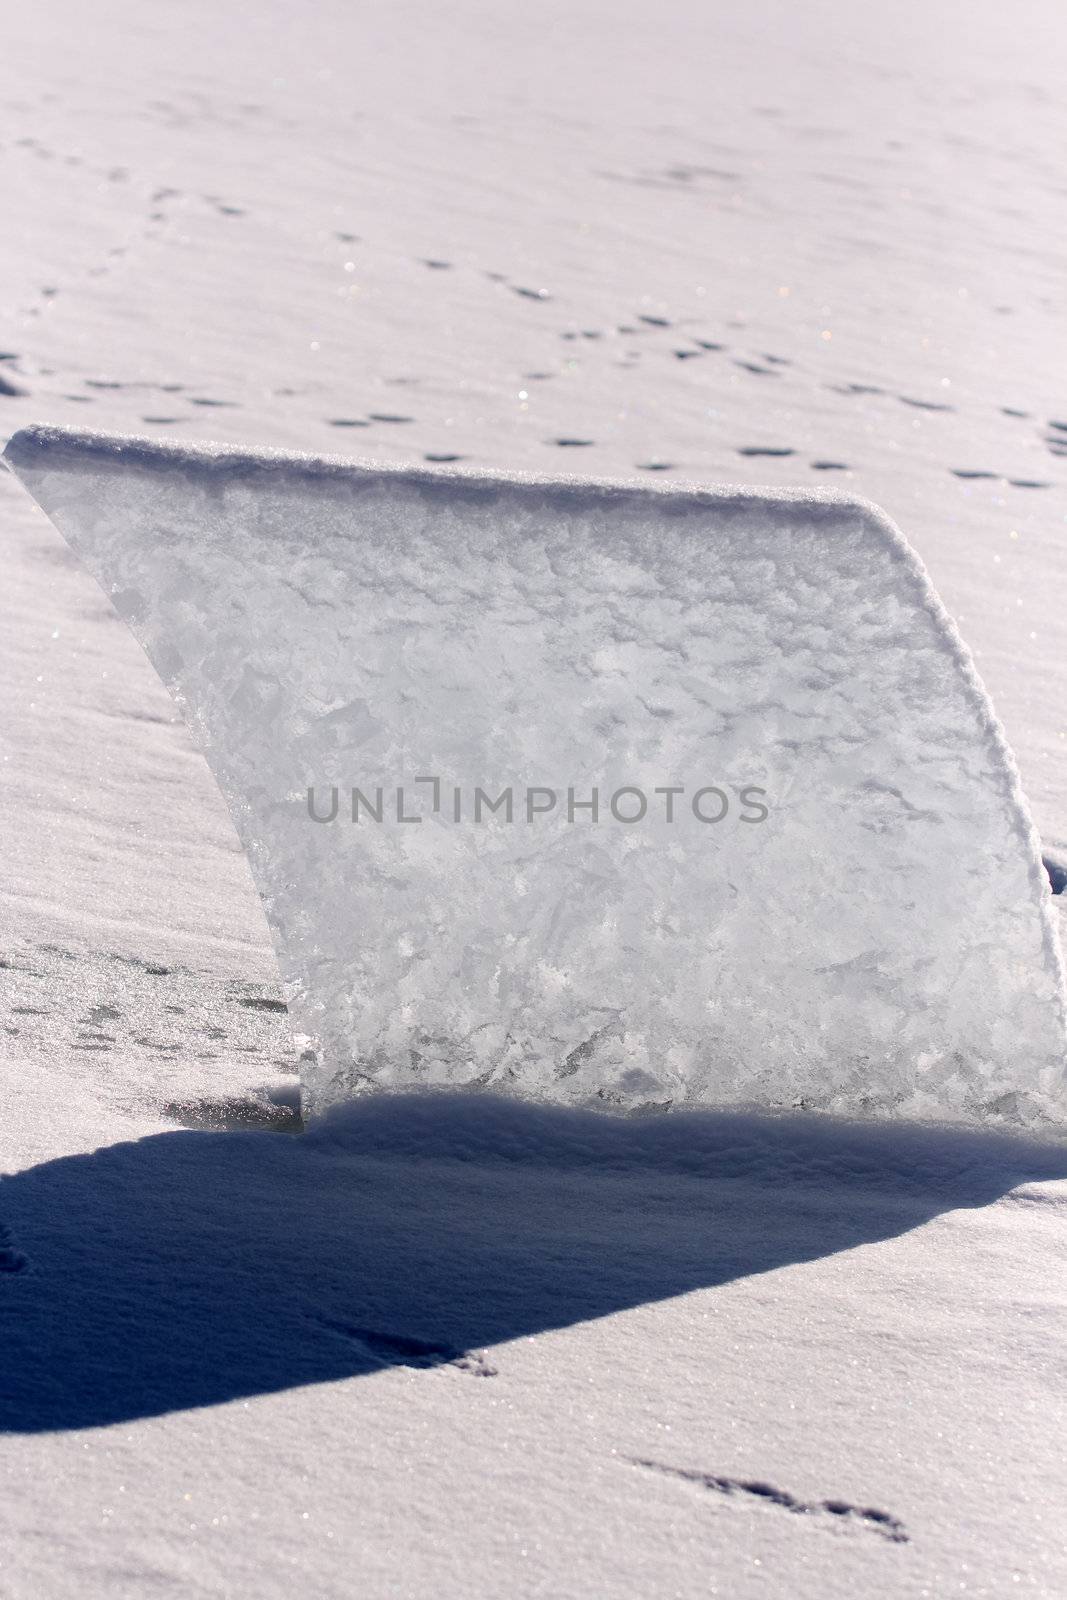 Large cut-out block of ice on the Tegernsee